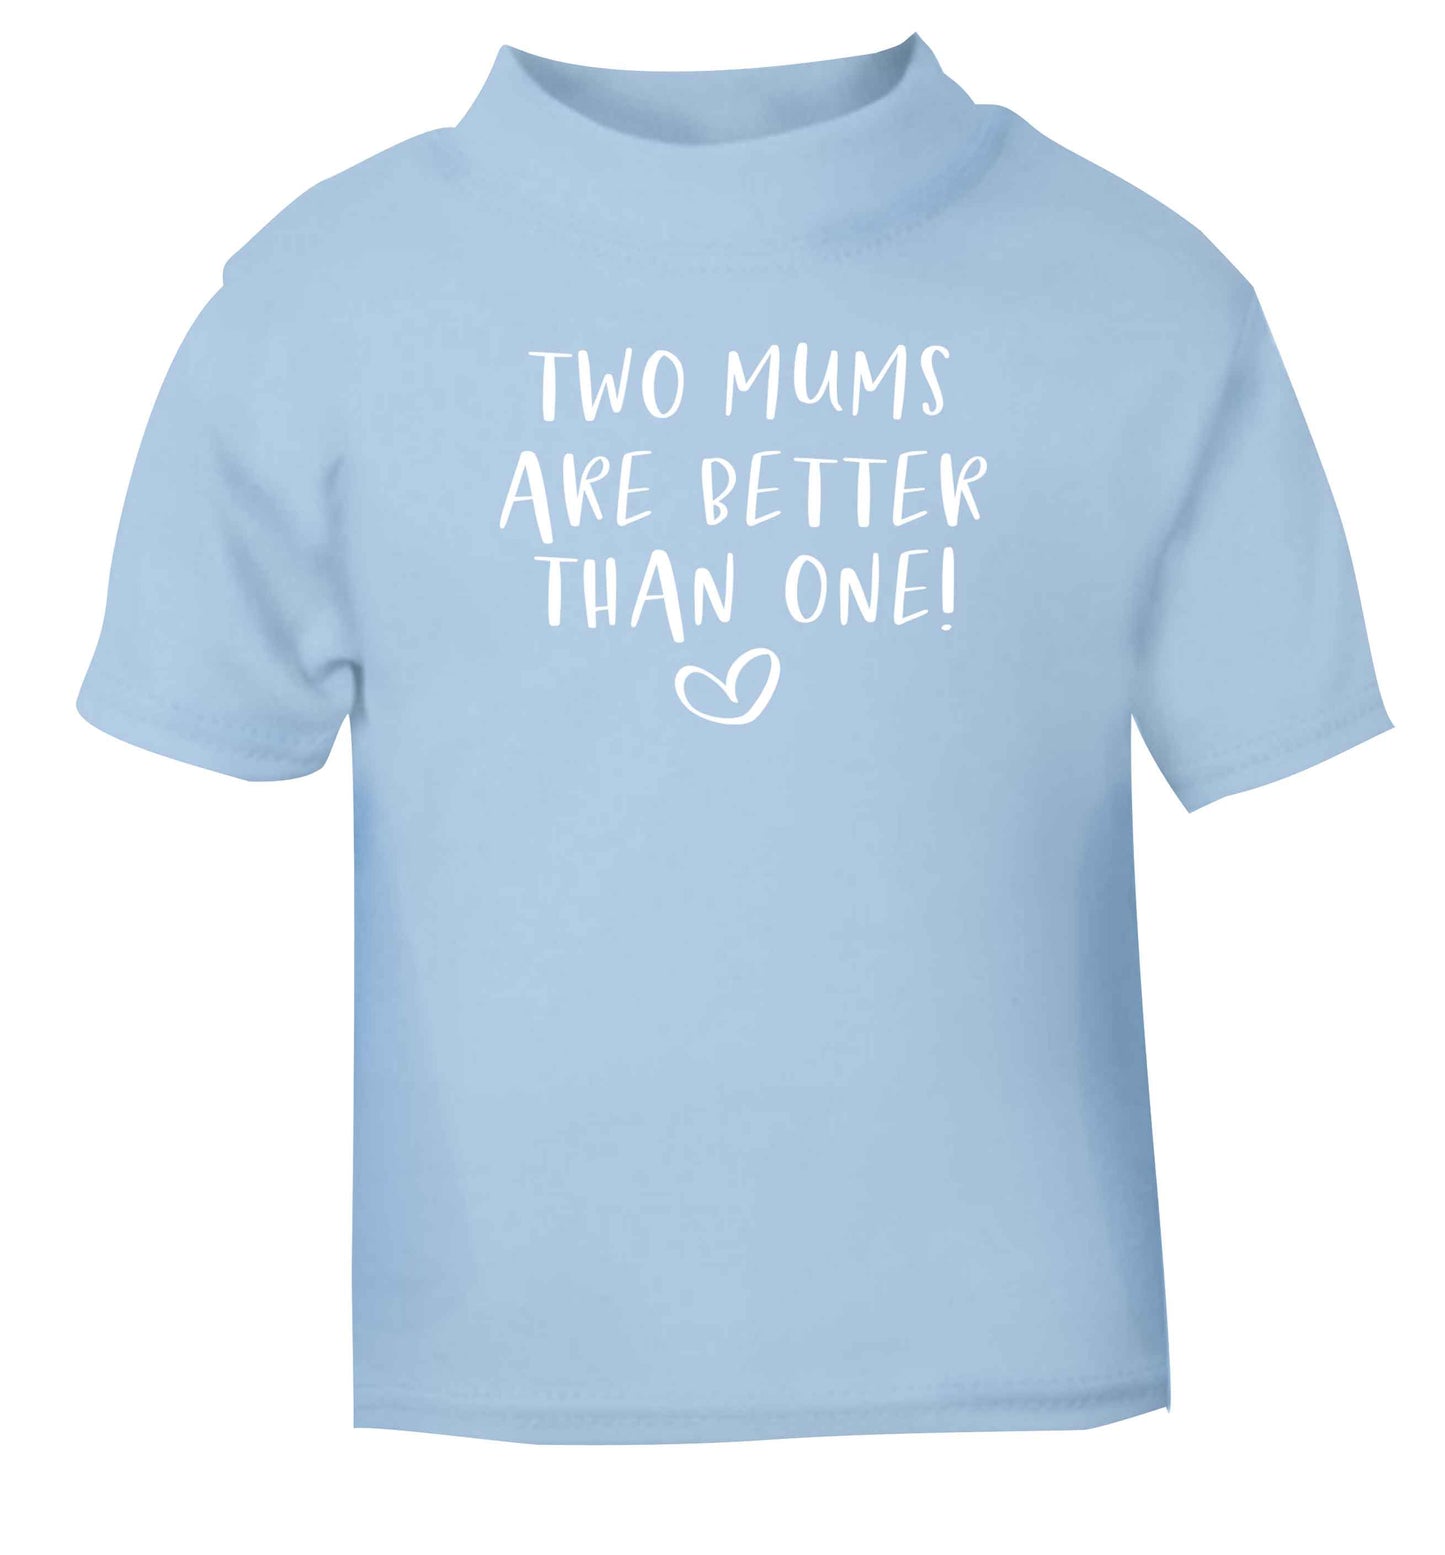 Two mums are better than one light blue baby toddler Tshirt 2 Years